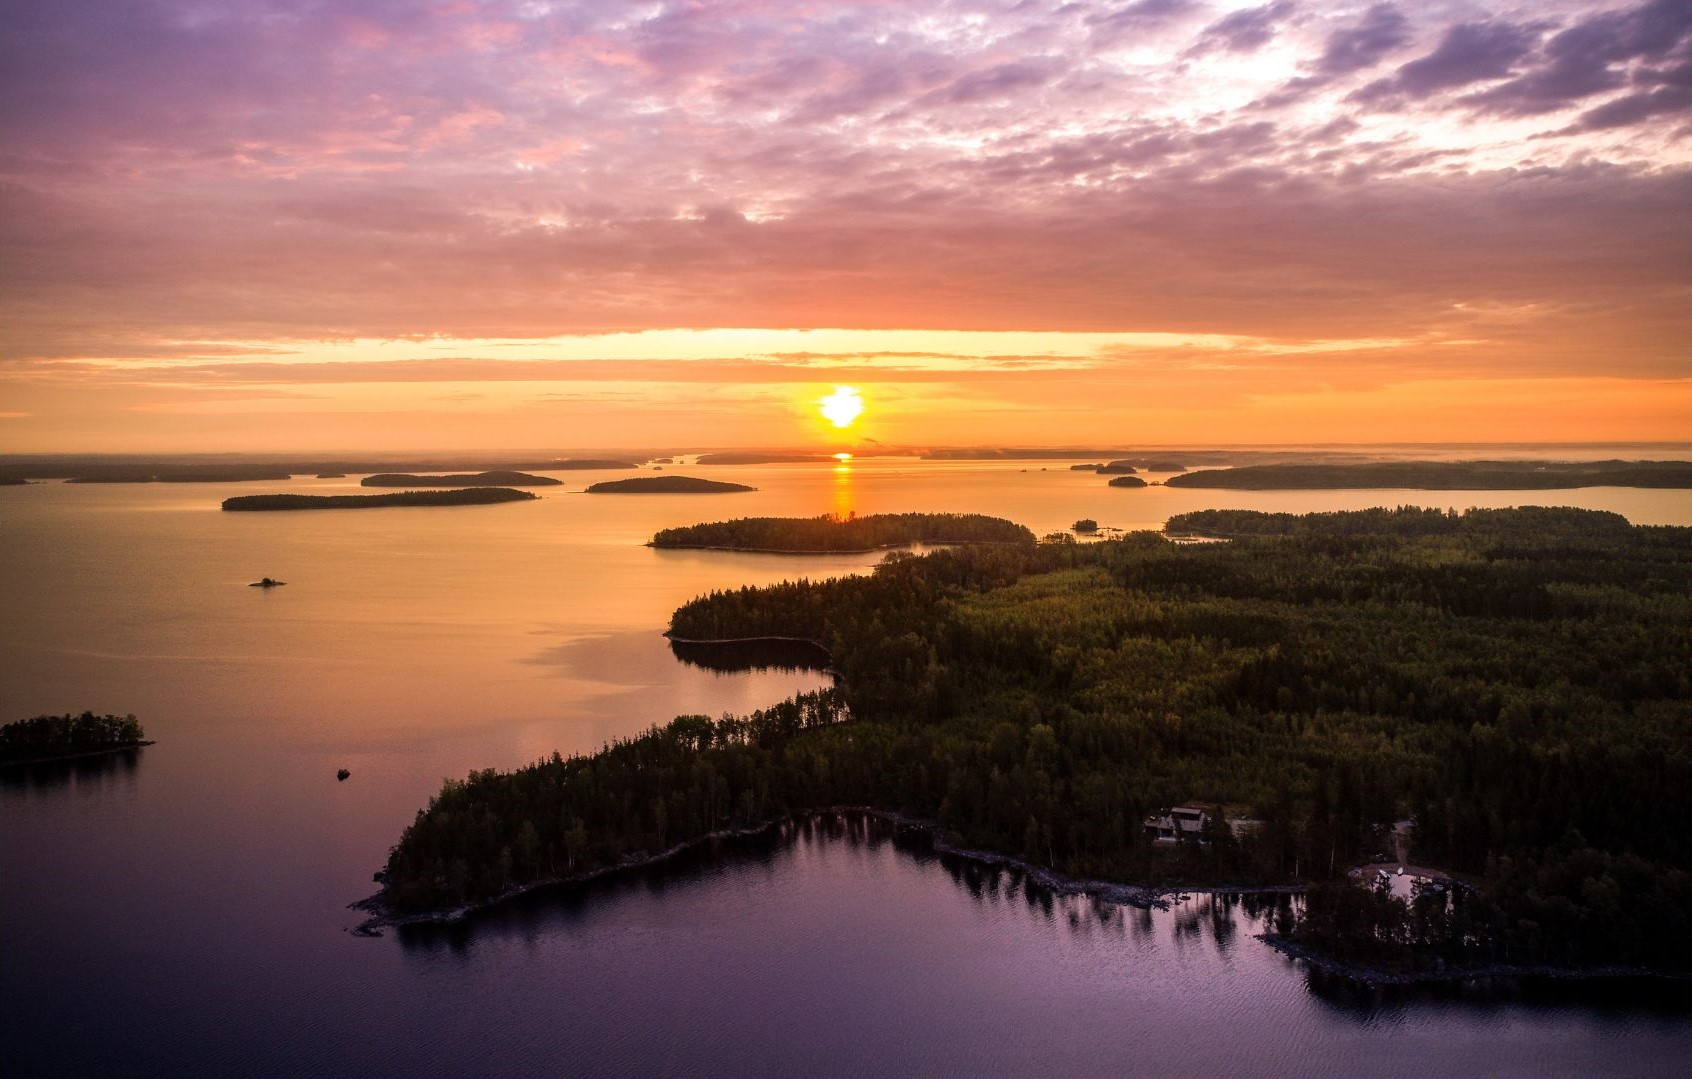 The archipelago of lake Saimaa. The sun is setting, and the lilac colors of the sky are reflected in the water.